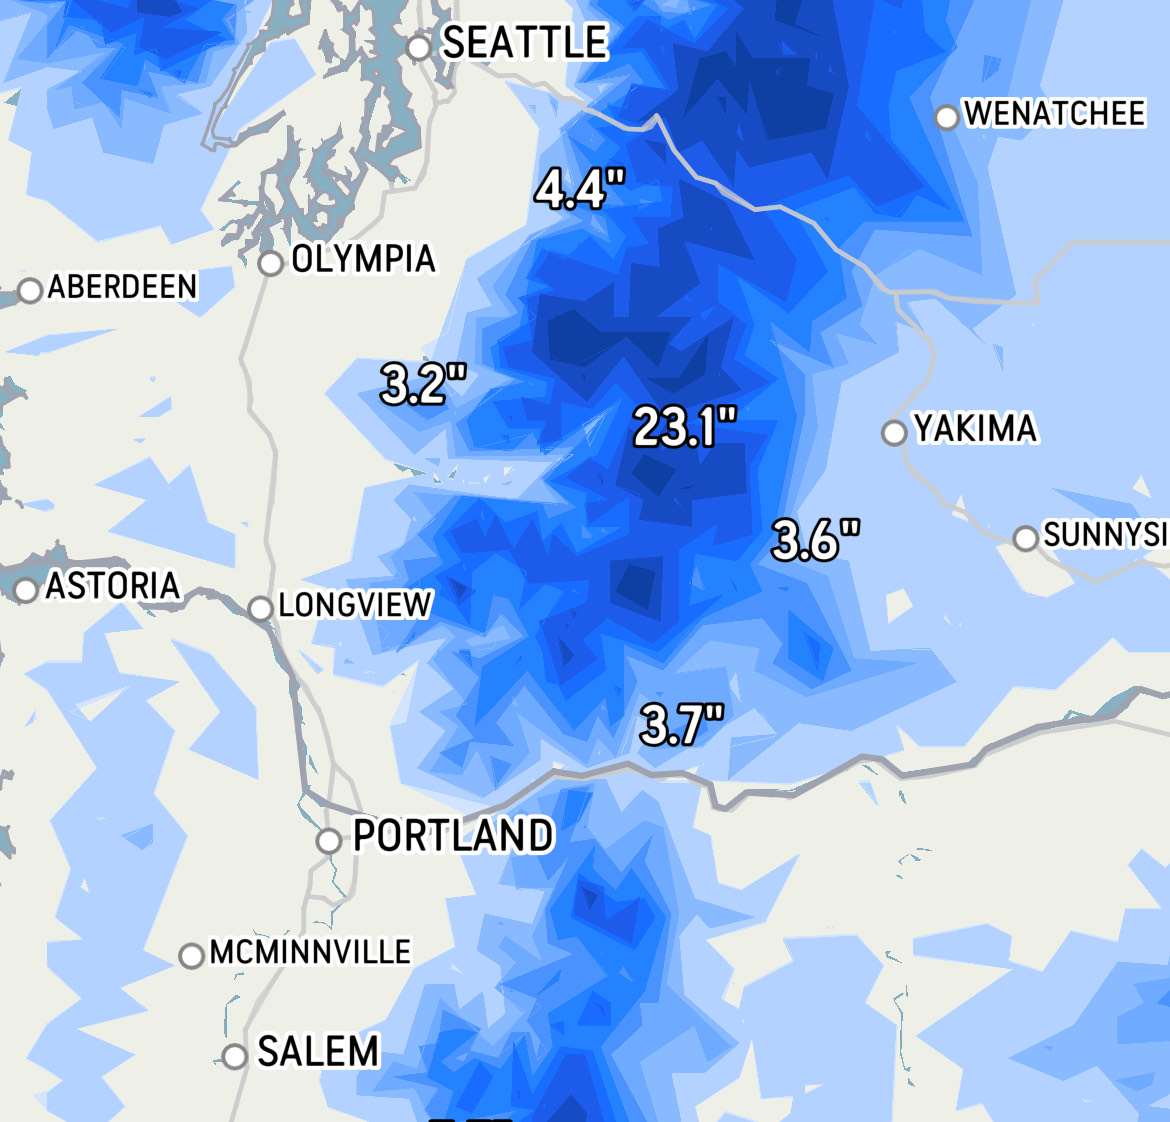 Snow Radar for total snow accumulation today